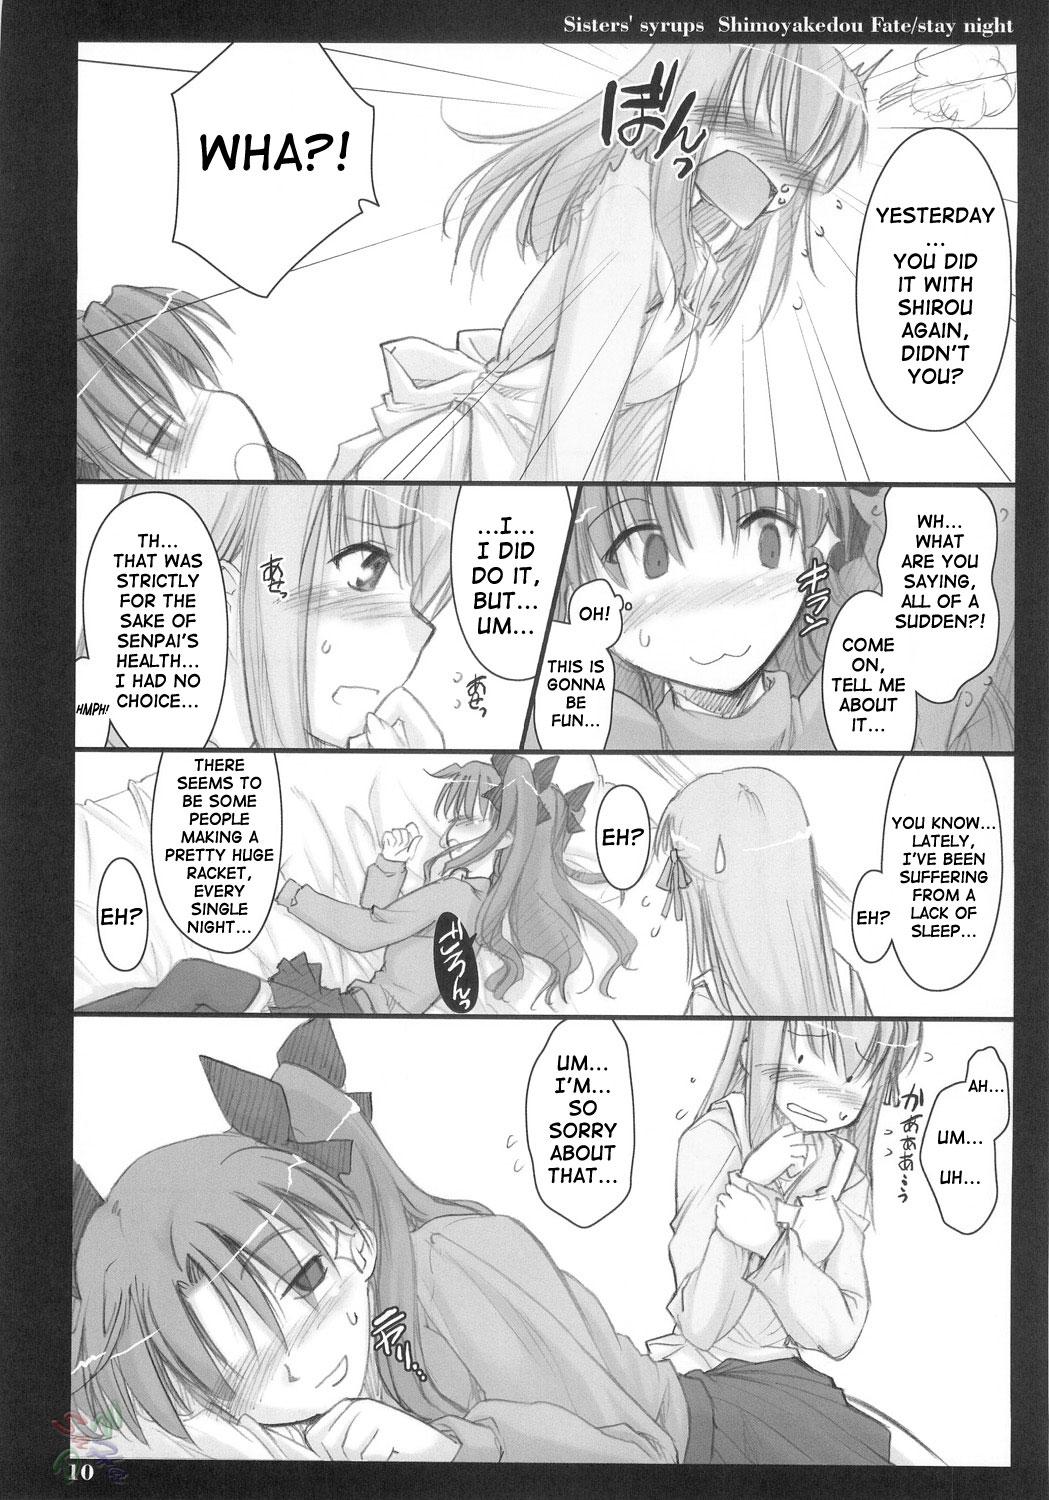 Interracial Hardcore Sisters' Syrups - Fate stay night Culos - Page 9